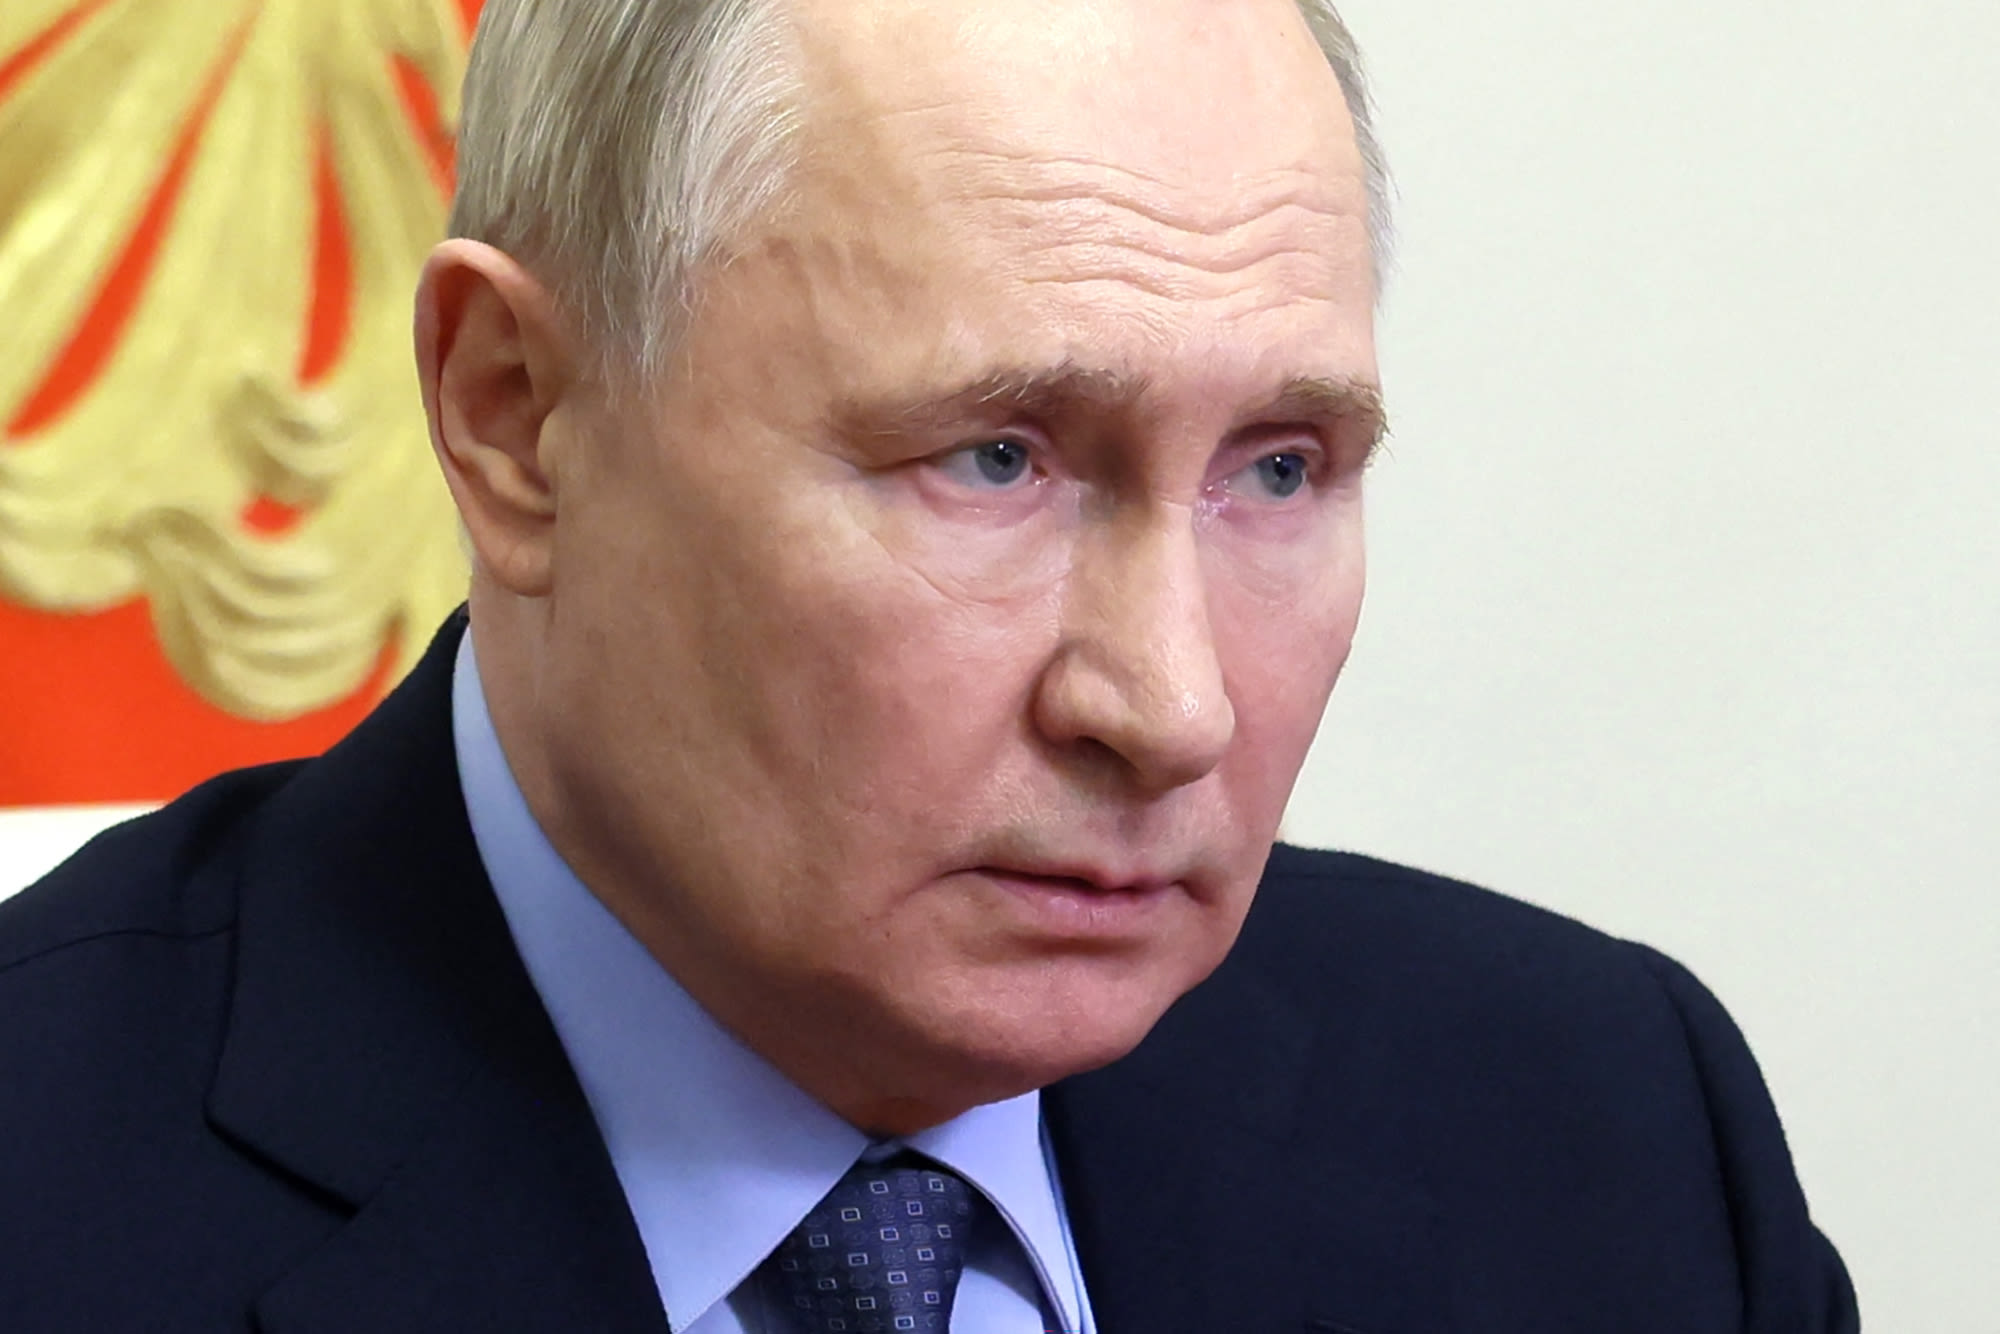 Is Putin facing another "coup"? What we know